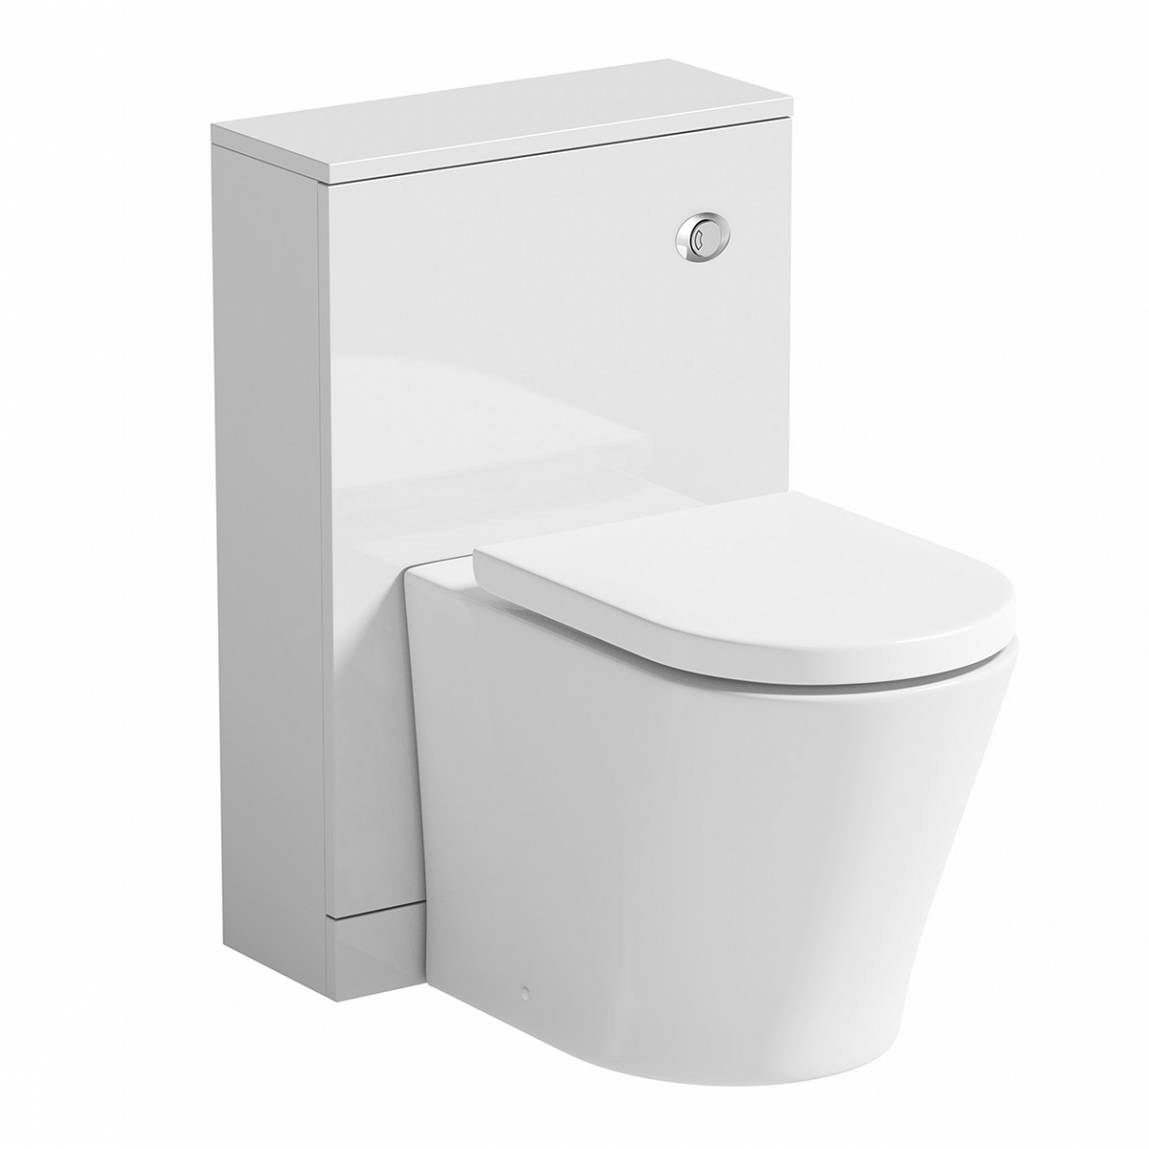 Clarity white back to wall toilet unit and contemporary toilet with soft close seat